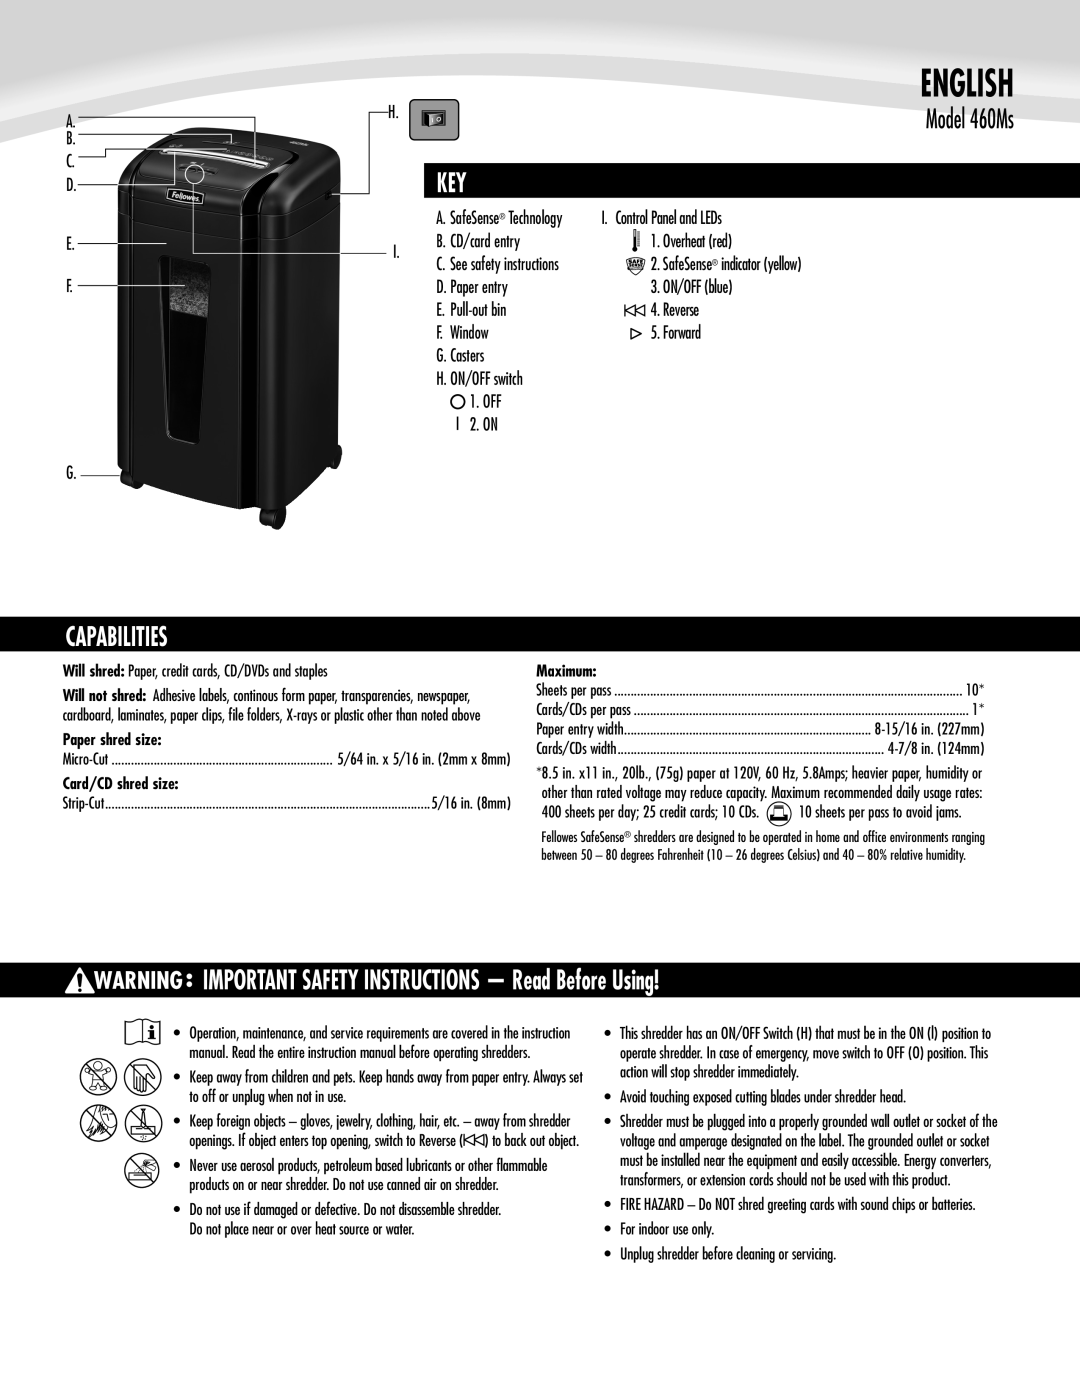 Fellowes manual Capabilities, IMPORTANT SAFETY INSTRUCTIONS - Read Before Using, English, Model 460Ms 